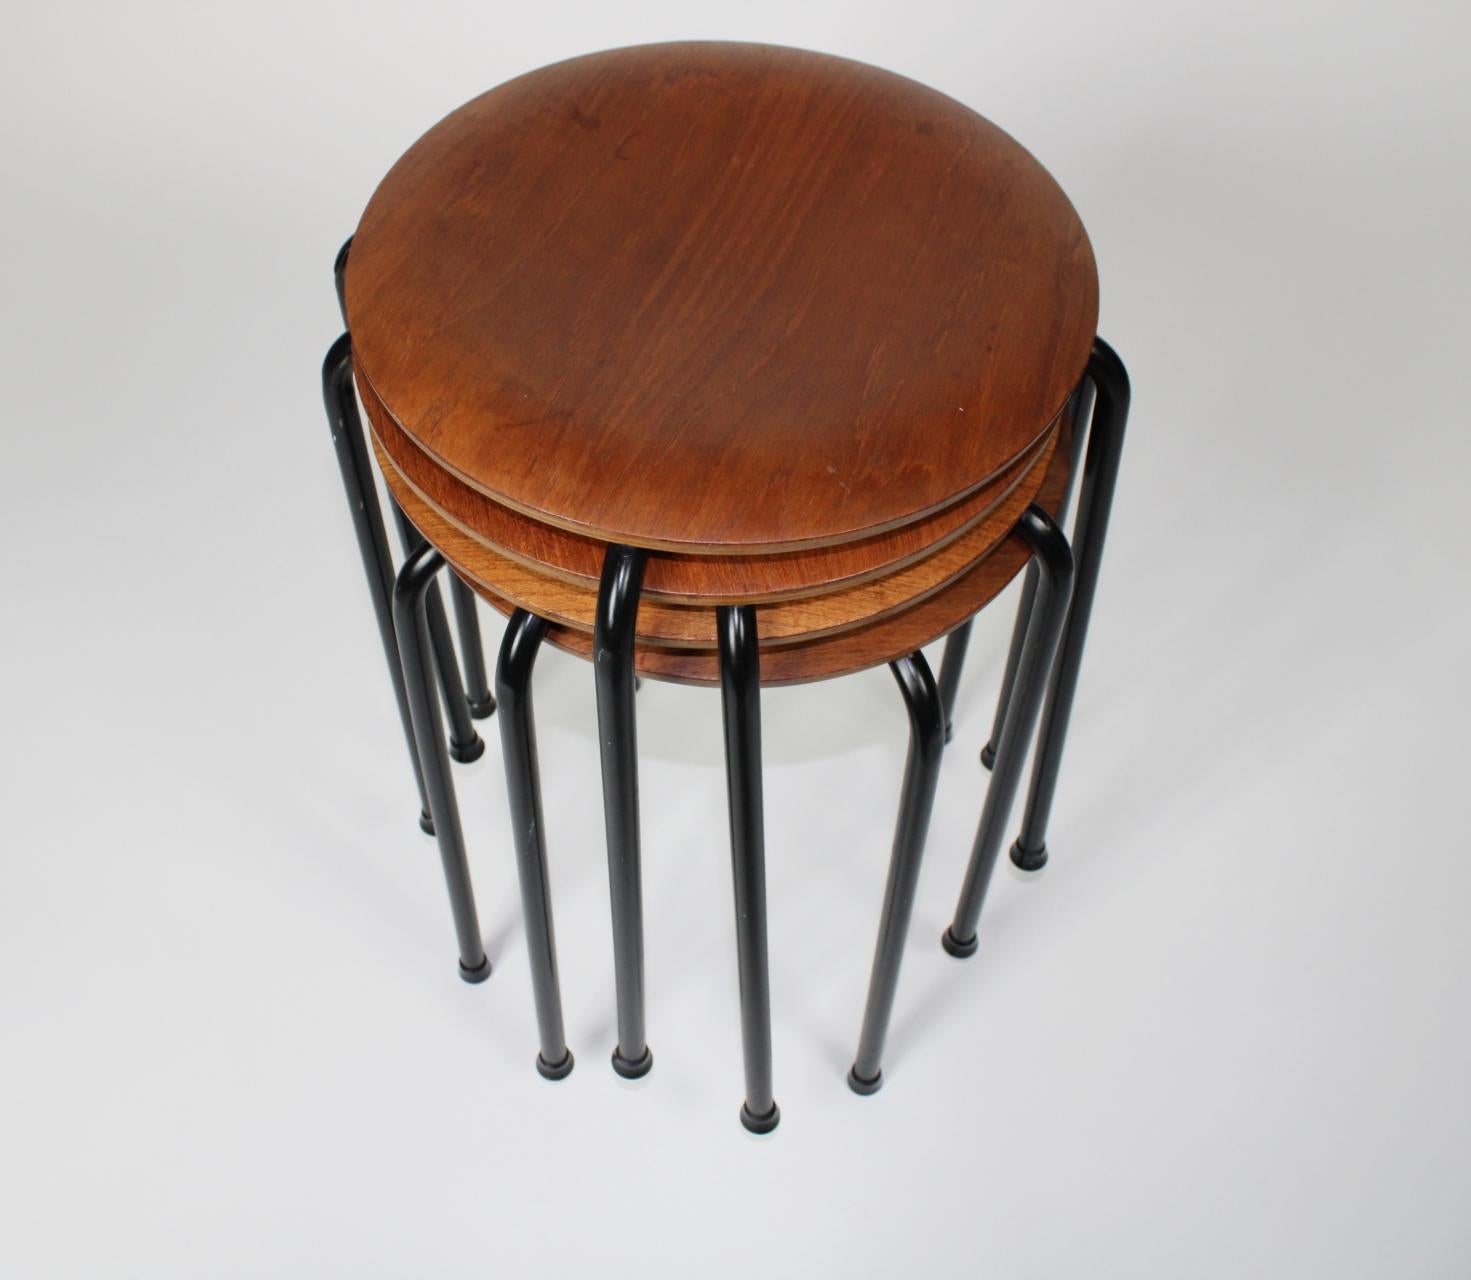 Set of 4 teak and steel stacking stools in the manner of Arne Jacobsen design.
Marked 